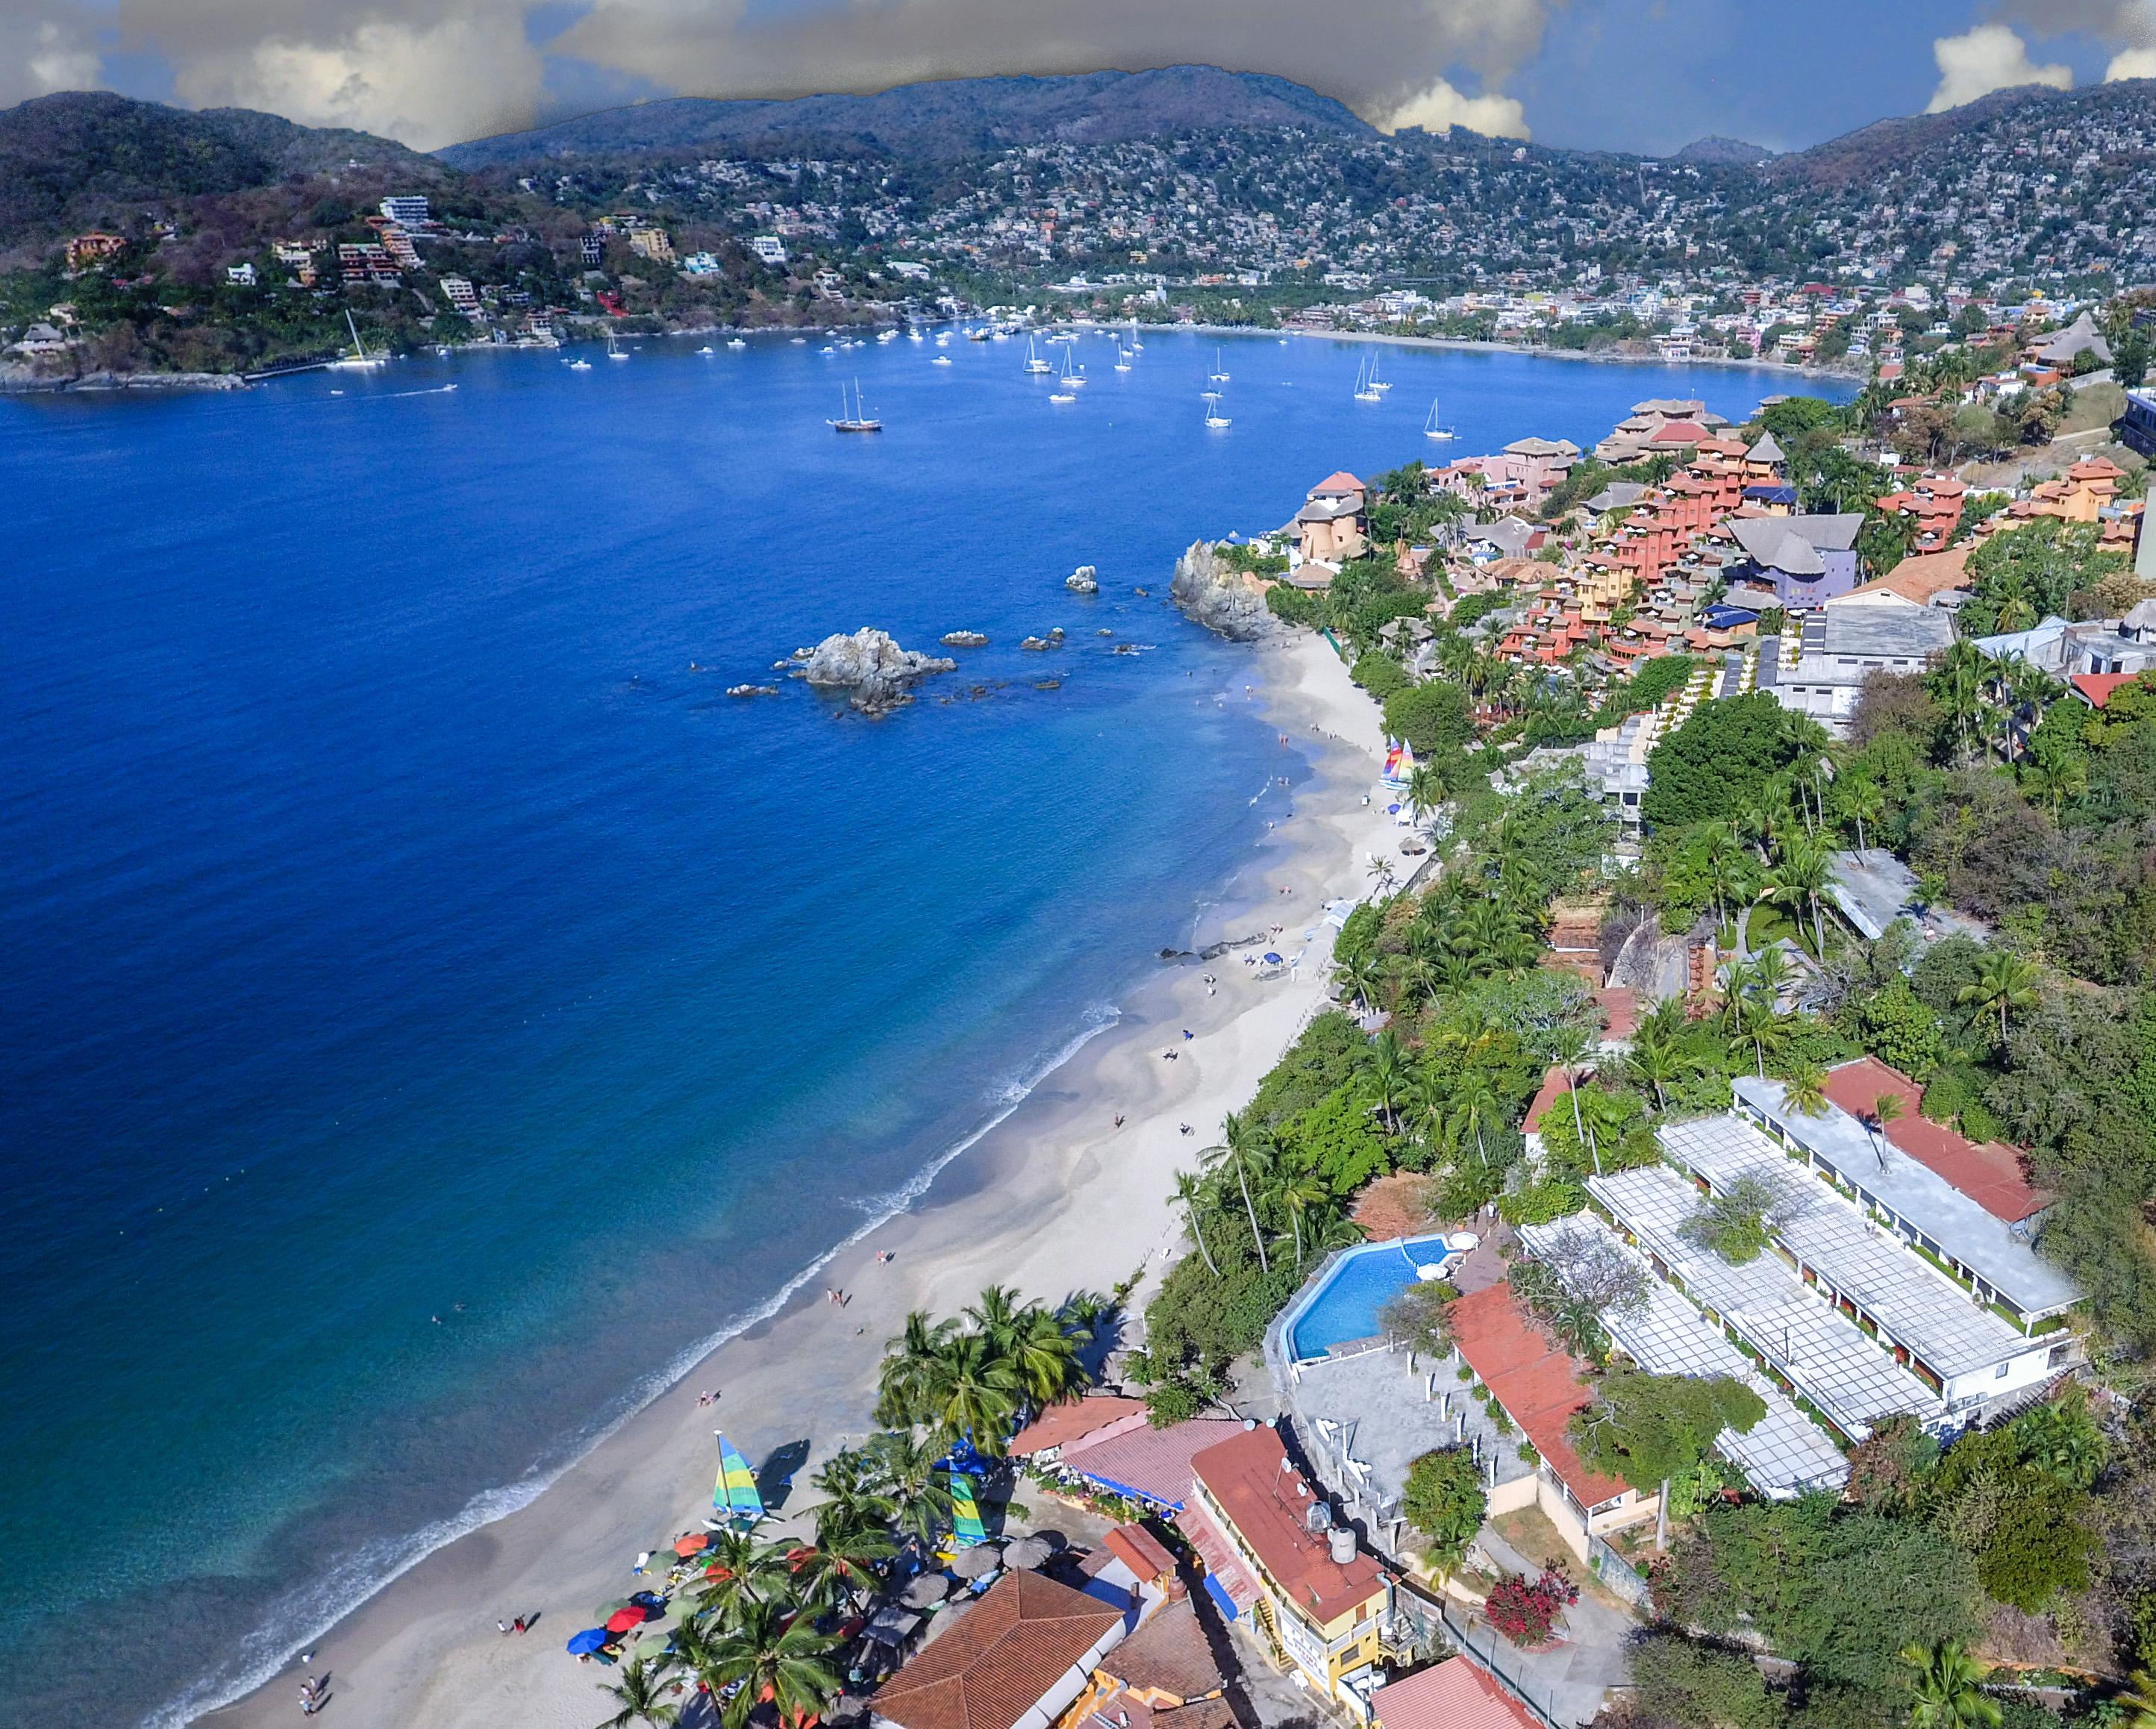 HOTEL CATALINA BEACH RESORT ZIHUATANEJO 4* (Mexico) - from US$ 53 | BOOKED